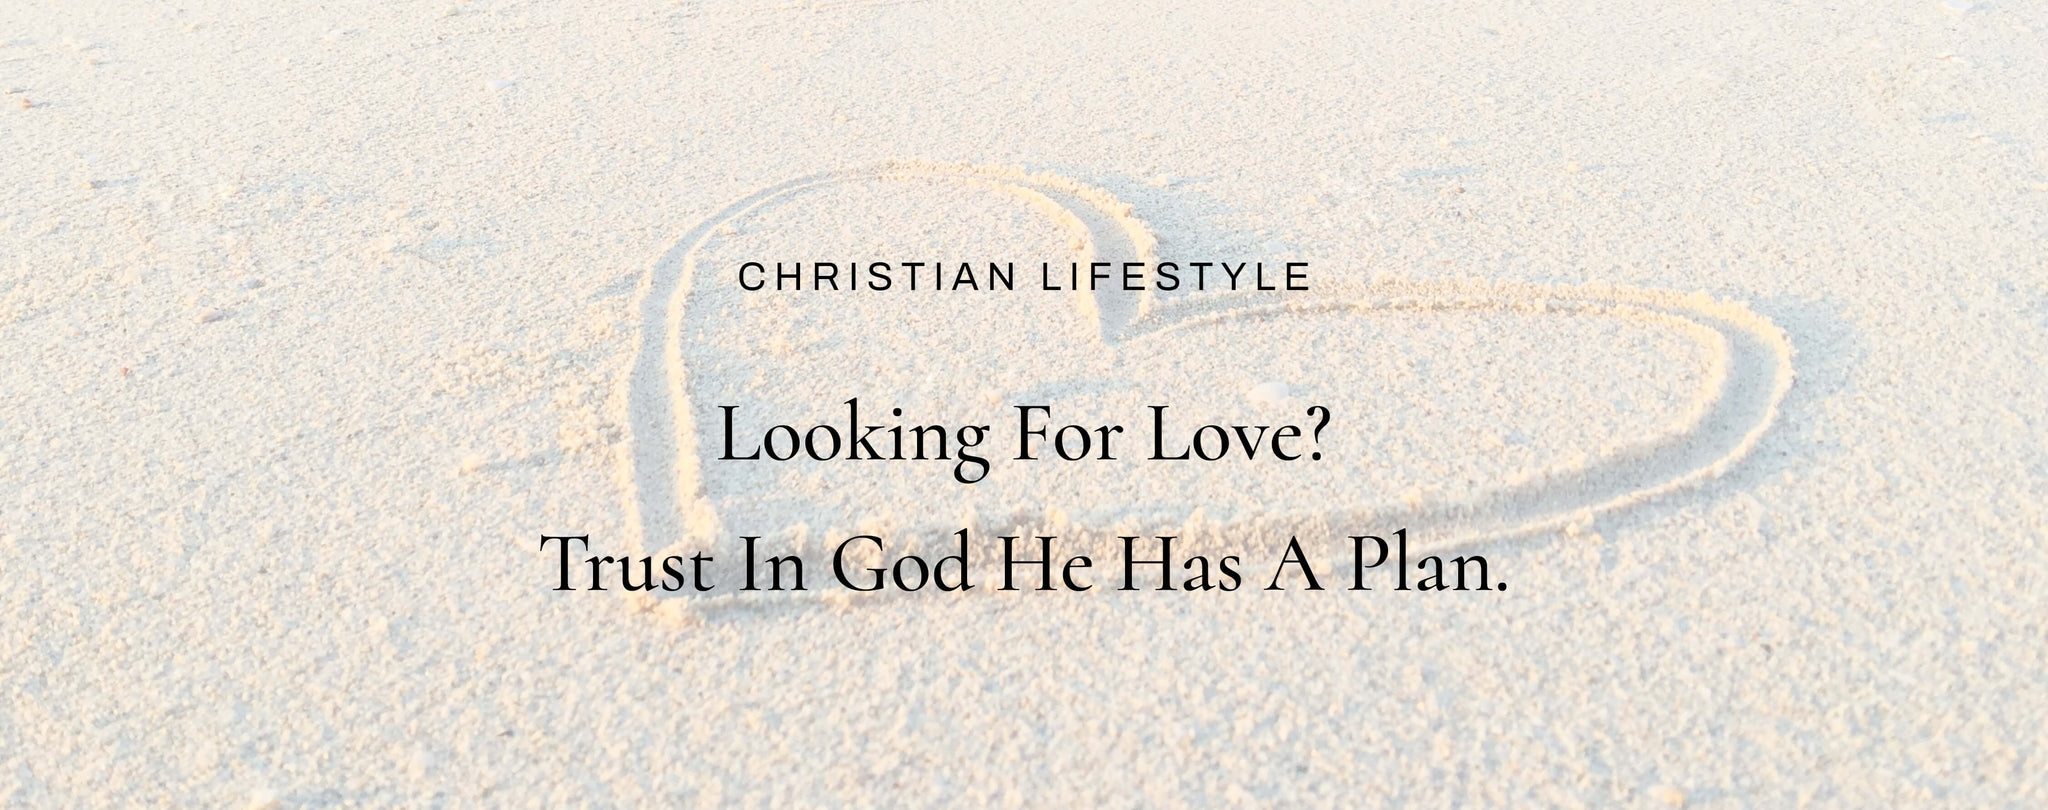 Looking For Love? Trust In God That He Has A Plan